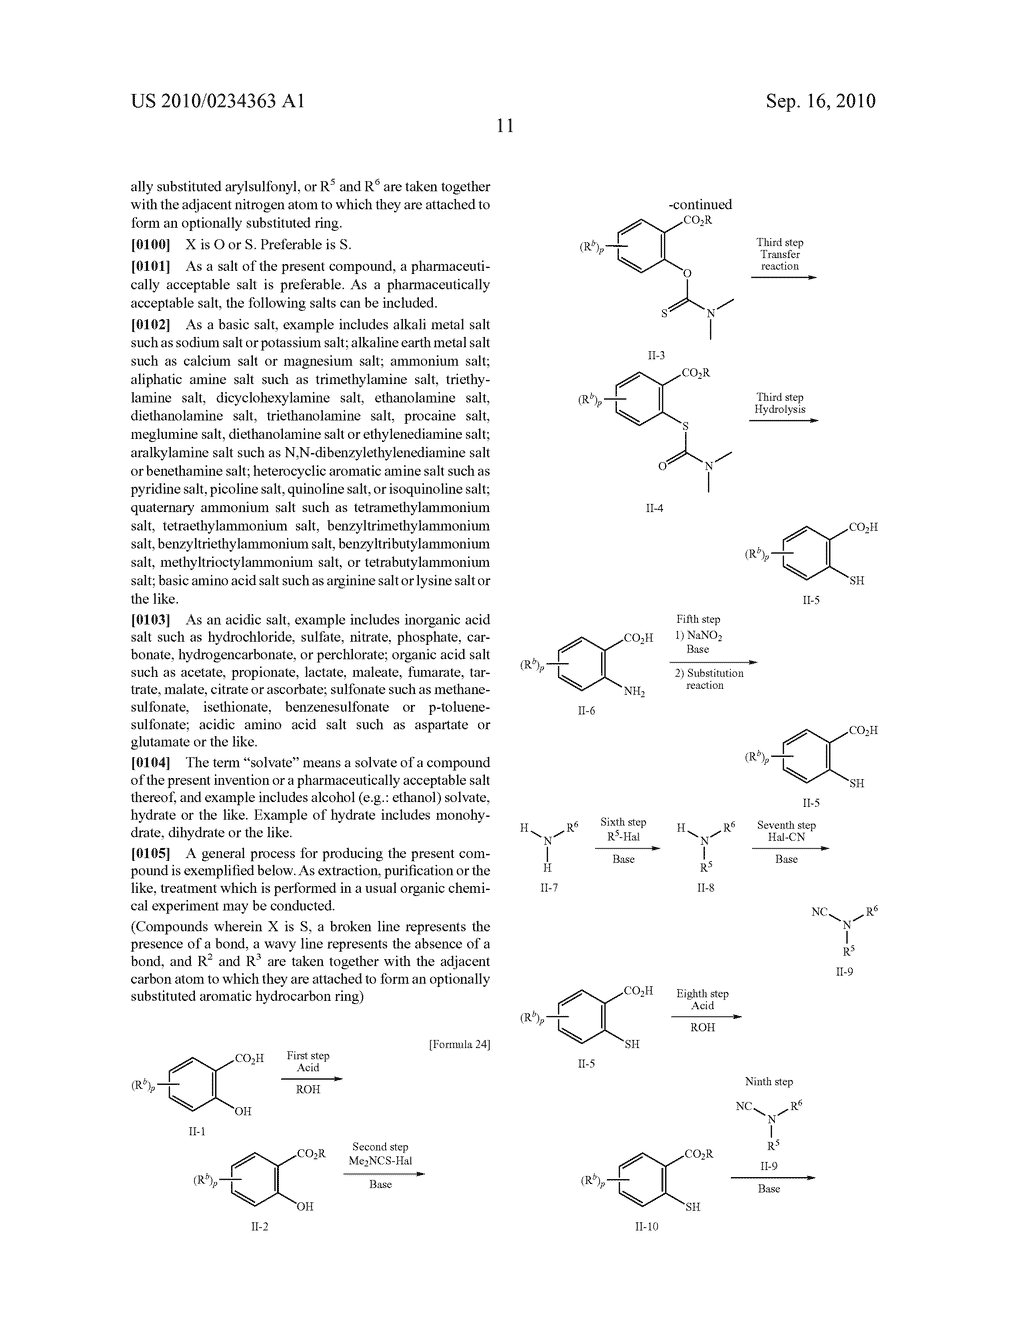 HETEROCYCLIC DERIVATIVE HAVING INHIBITORY ACTIVITY ON TYPE-I 11 DATA-HYDROXYSTEROID DEHYDROGENASE - diagram, schematic, and image 12